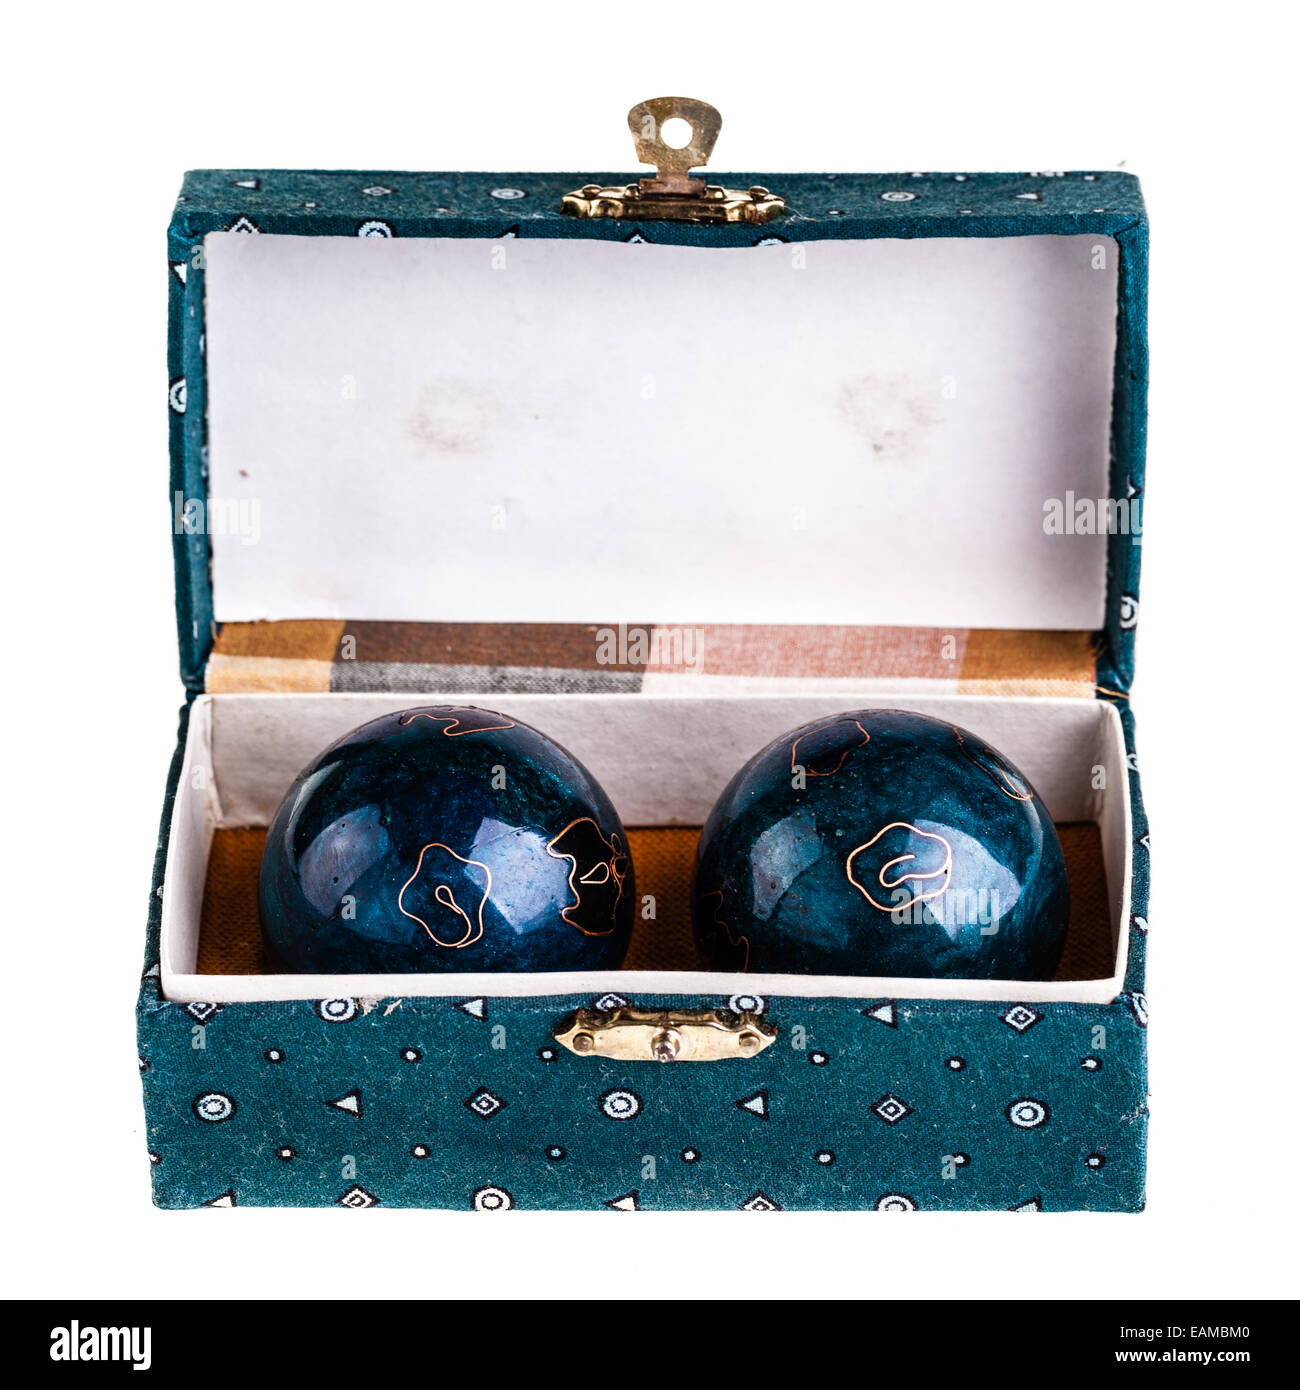 Chinese Baoding balls or medicine balls for relaxation Stock Photo - Alamy